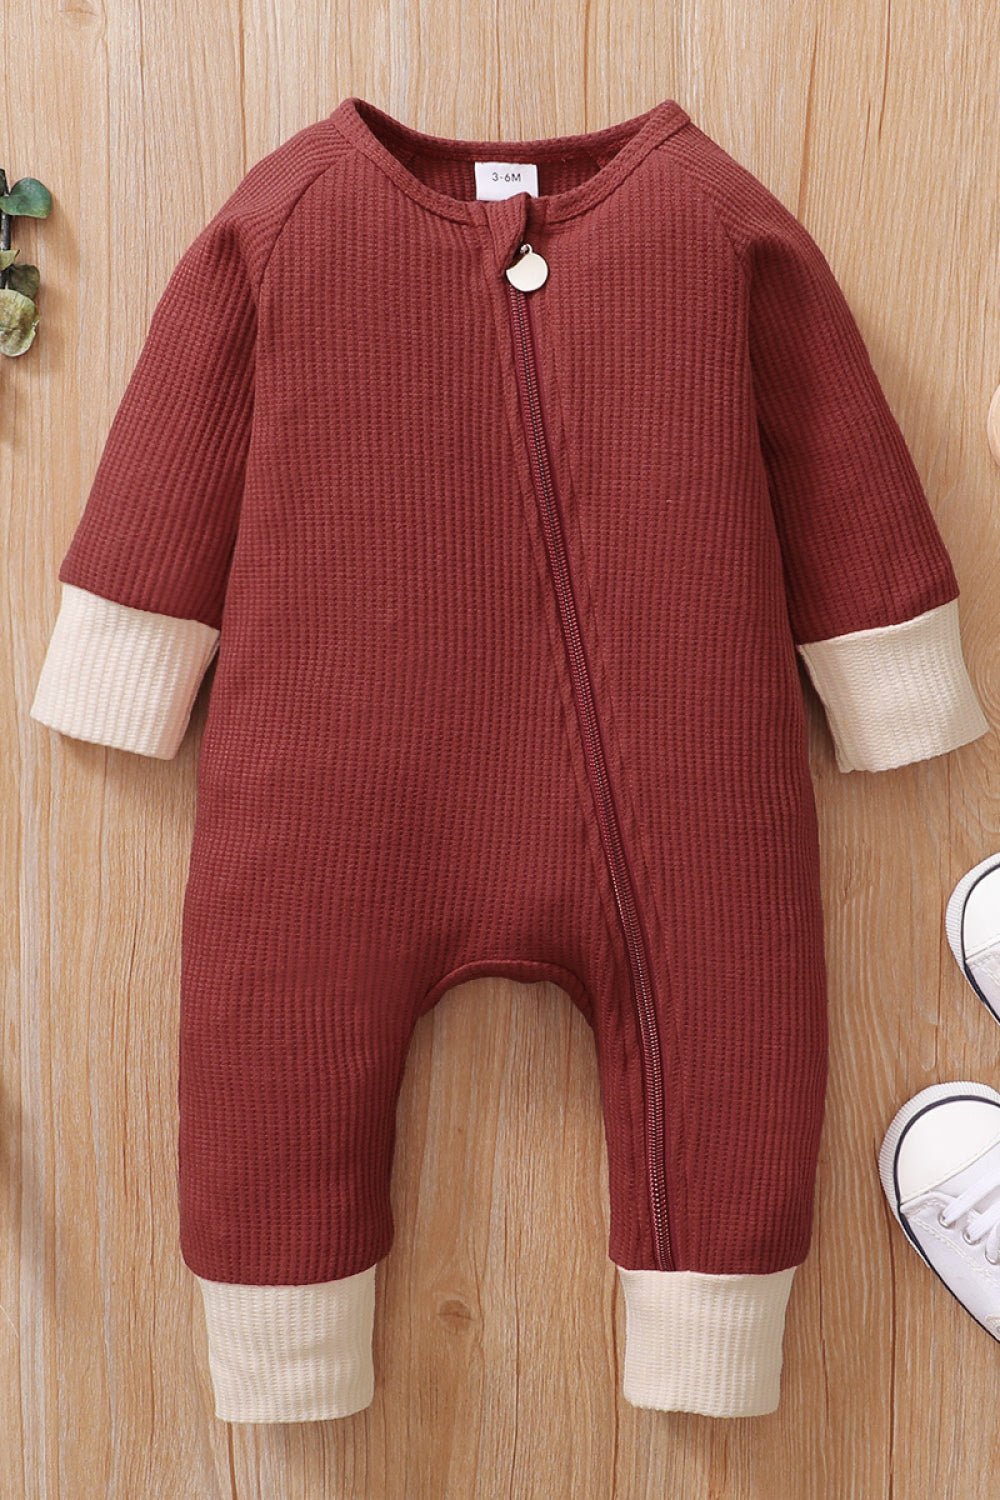 Baby Contrast Trim Ribbed Jumpsuit Age: 0-18m - Fashion Girl Online Store